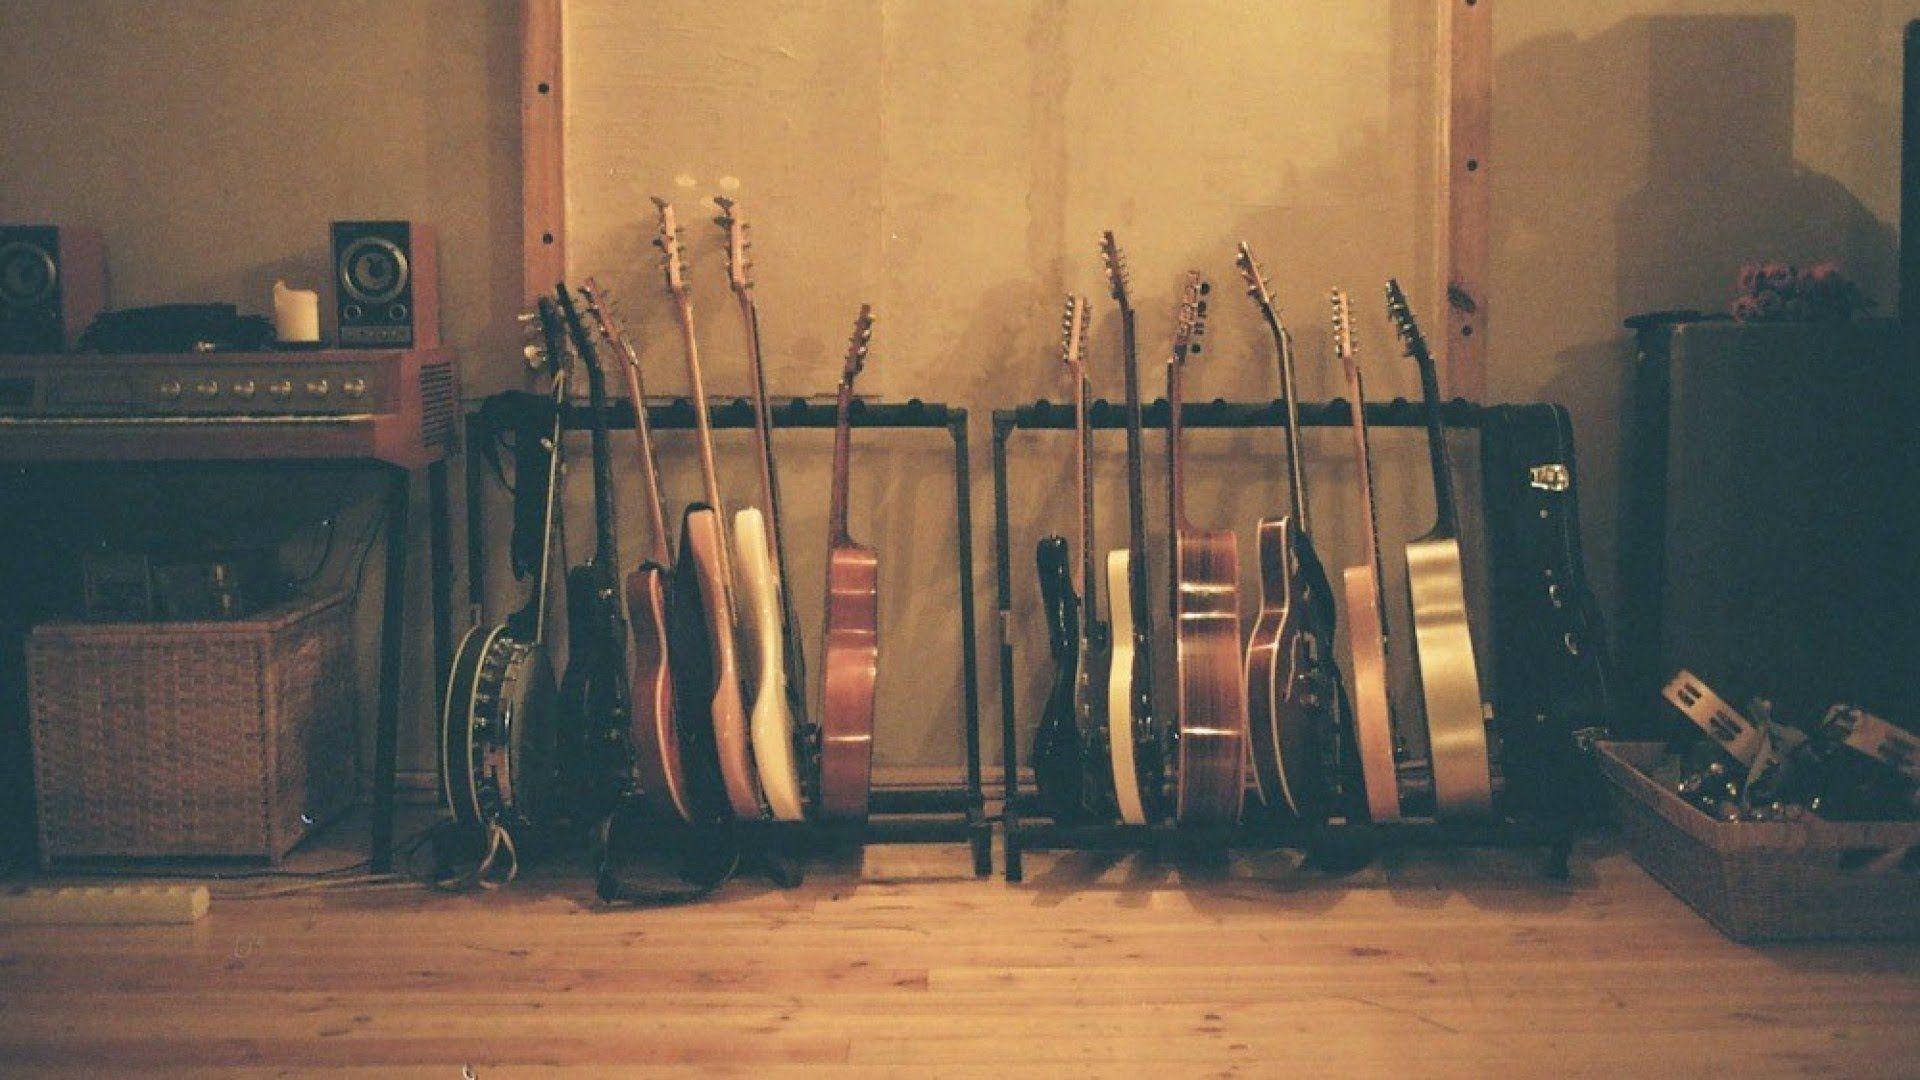 Indie Aesthetic Laptop Sepia Filter Guitats Background